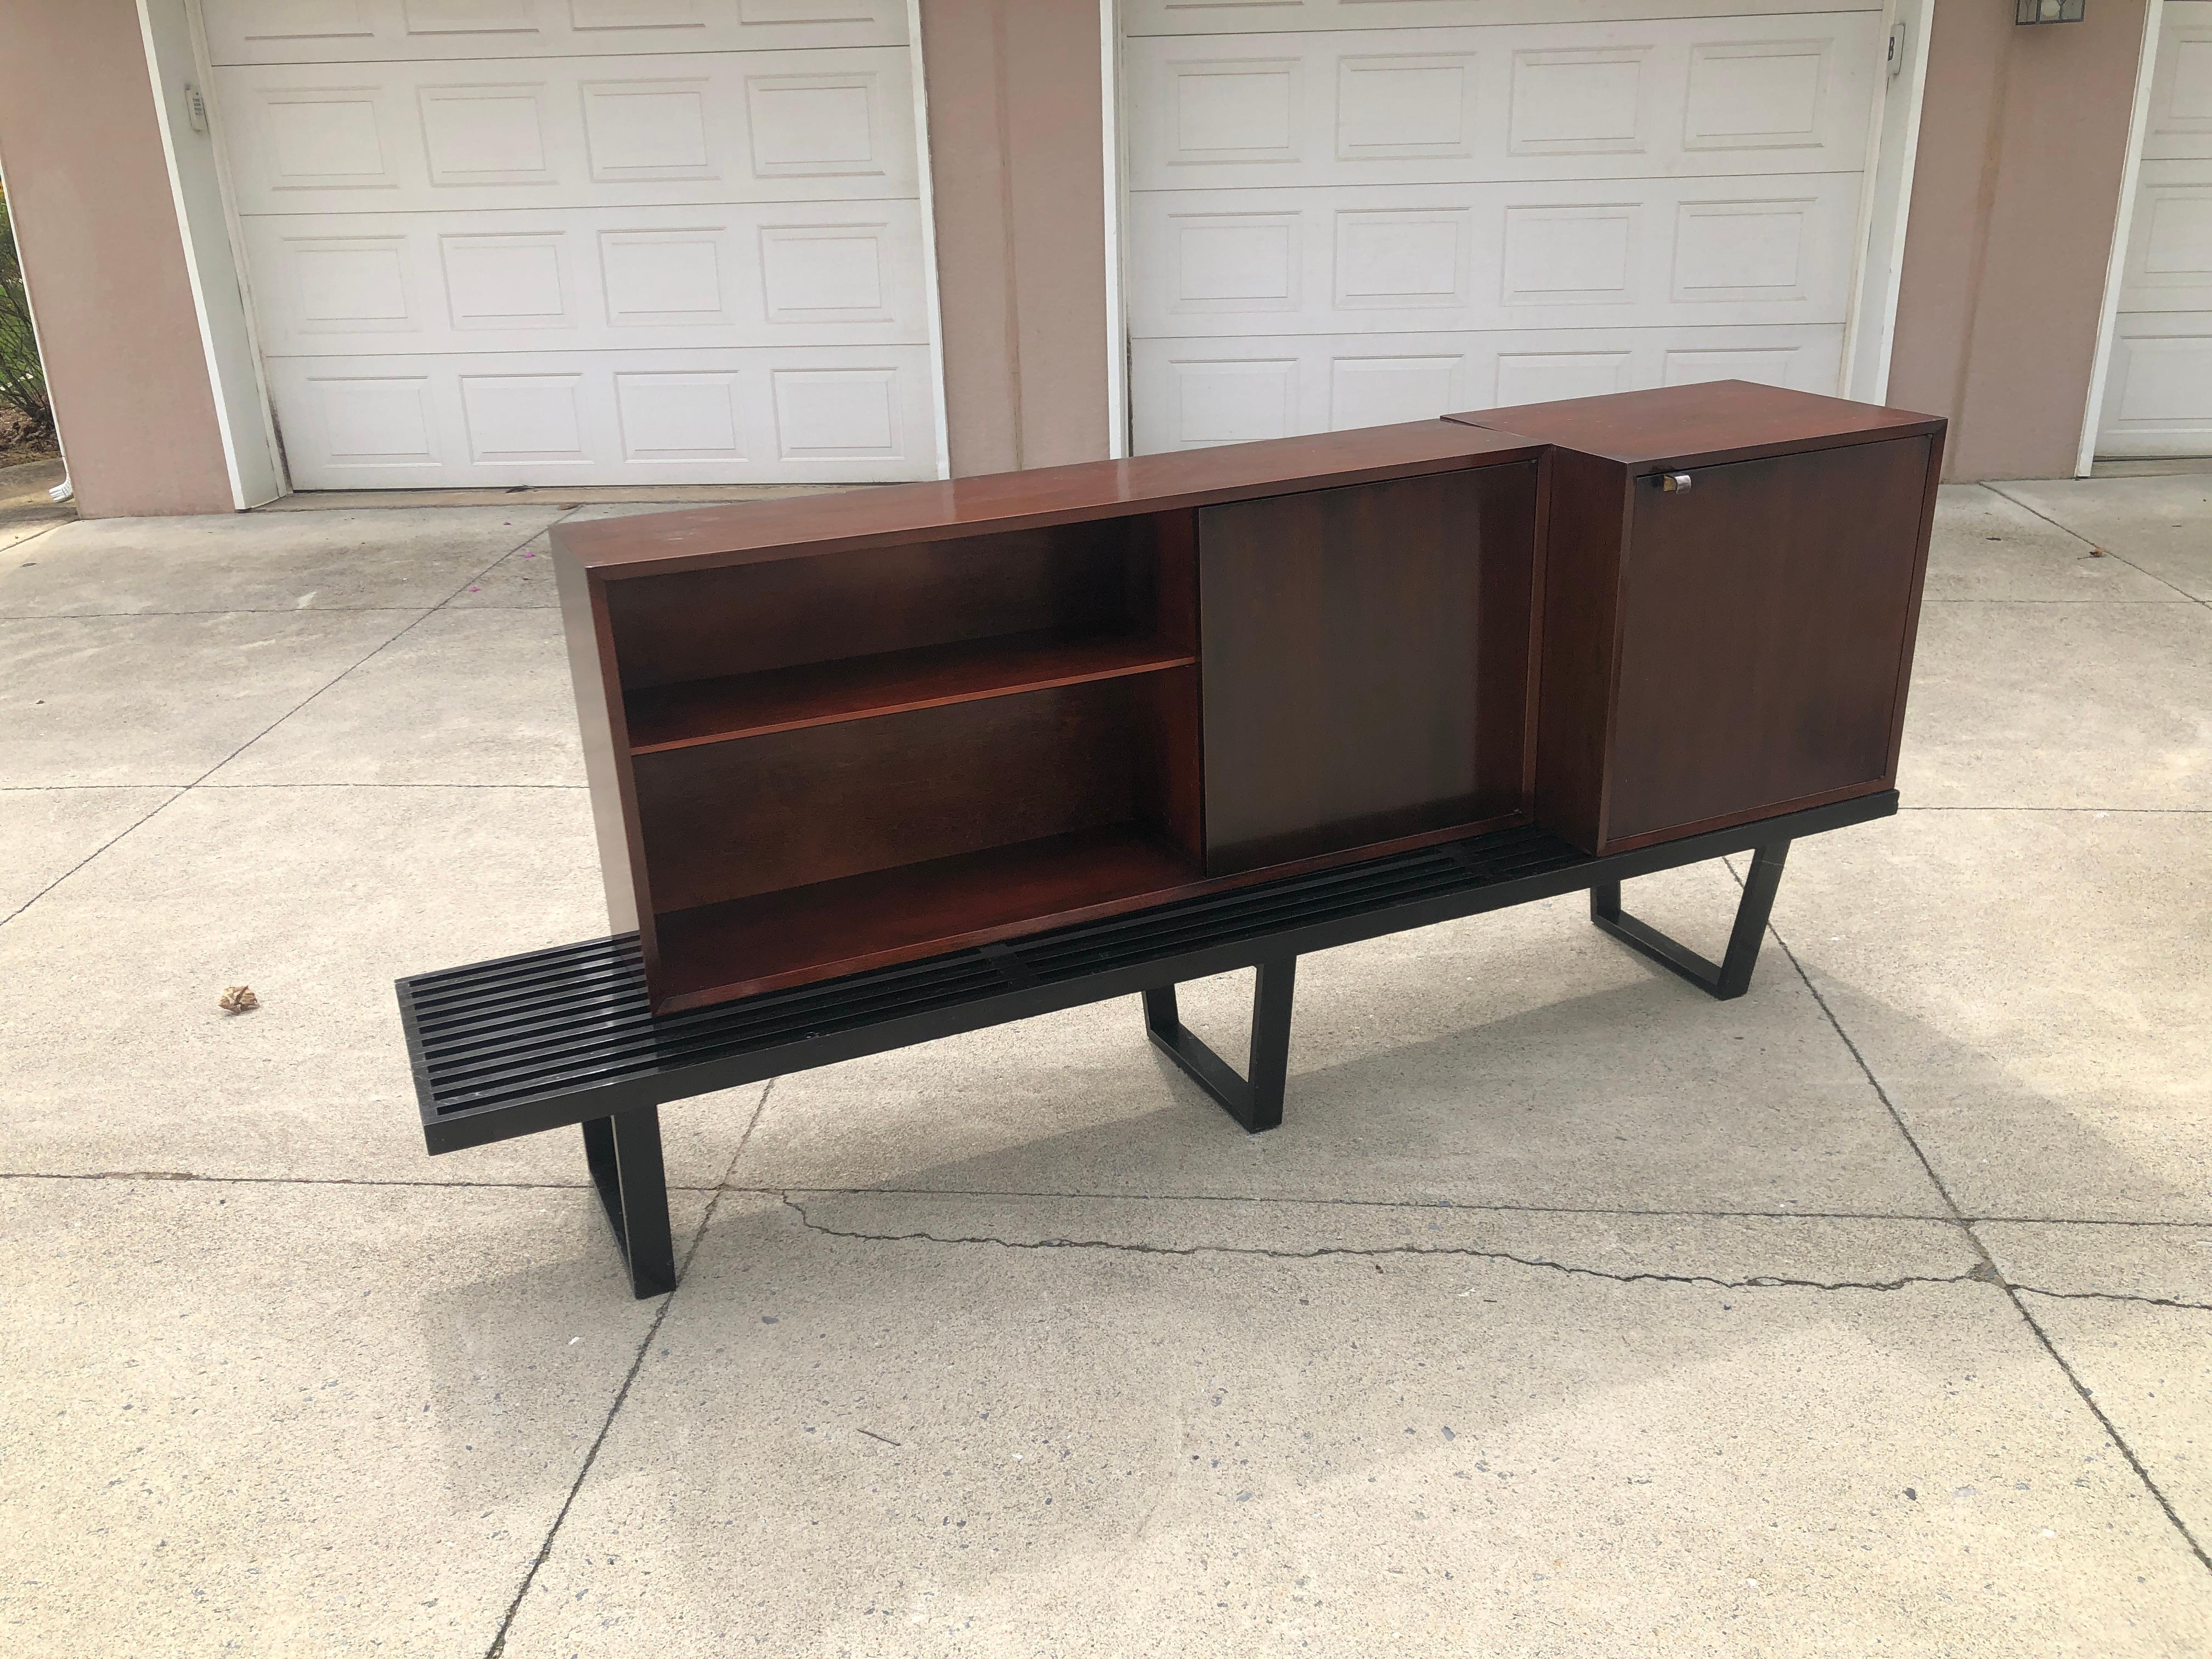 1950s slat bench, desk chest of drawers, and bookcase.
Wood, steel
Herman Miller George Nelson
An original 1950s Herman Miller set in very nice vintage condition, with a great patina on the wood and nickel pulls.
The slat bench appears to have